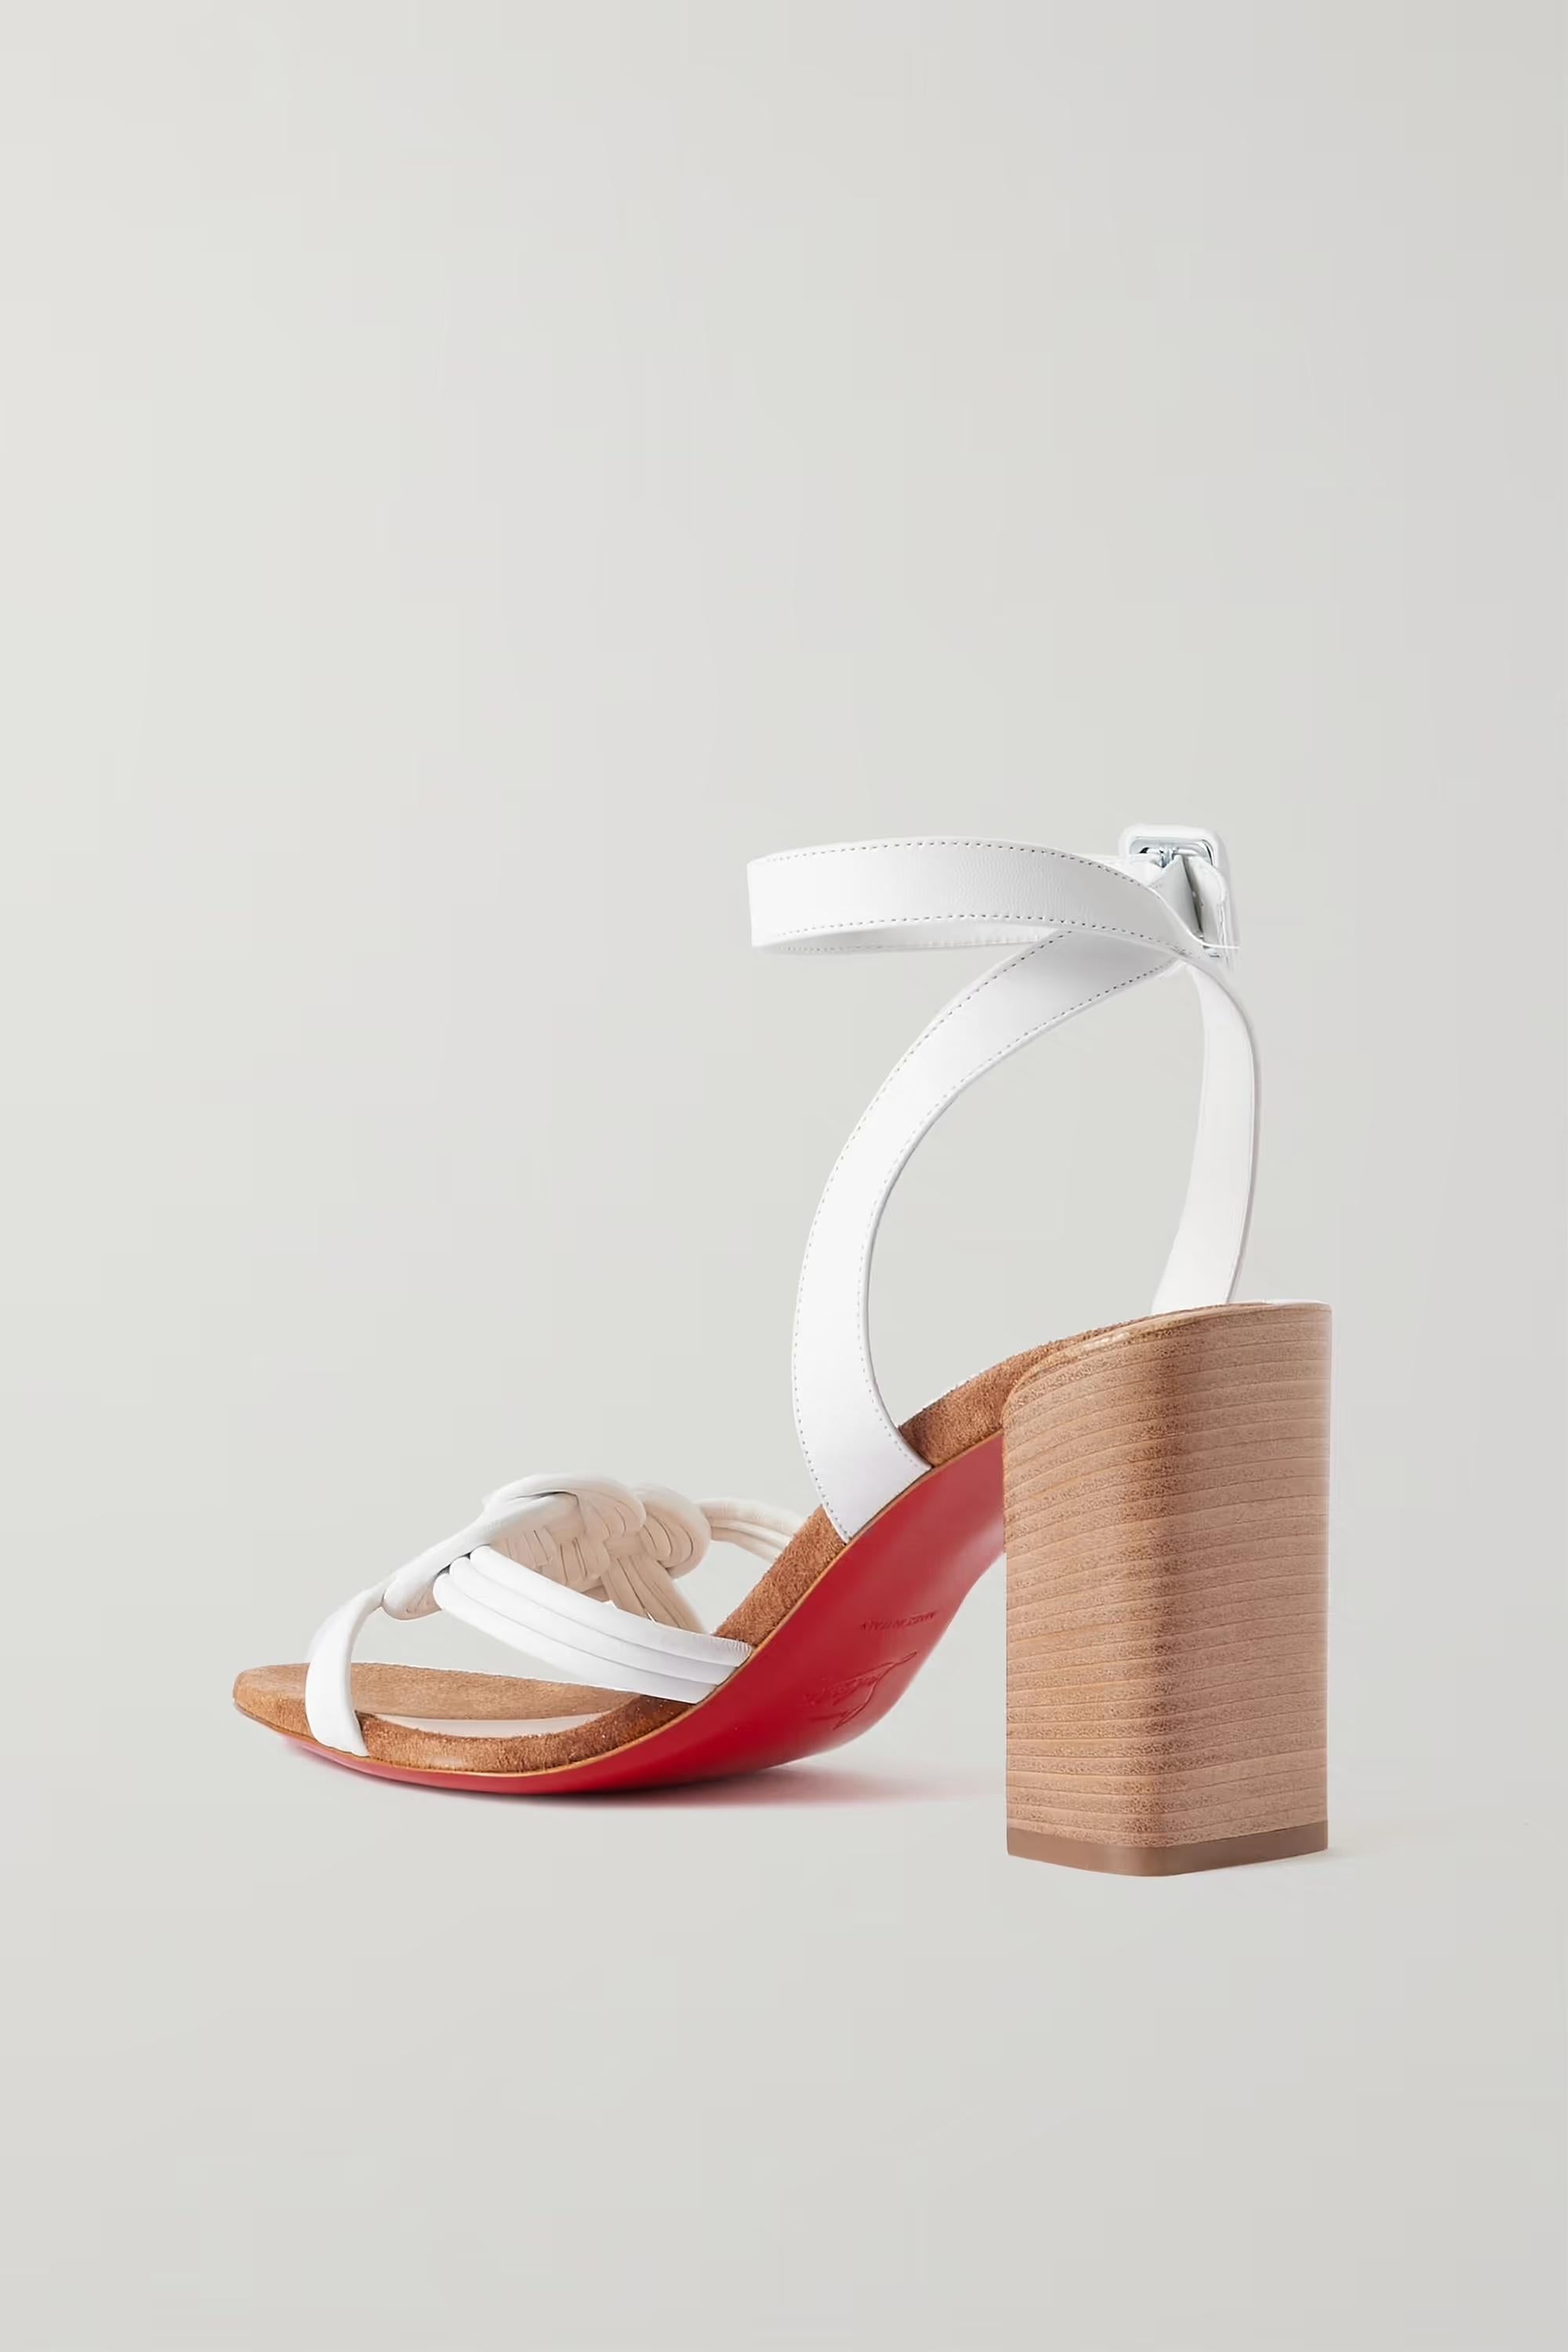 Christian Louboutin Ella 85 White Nappa Sandals Sz 38.5 NWT In New Condition For Sale In Paradise Island, BS